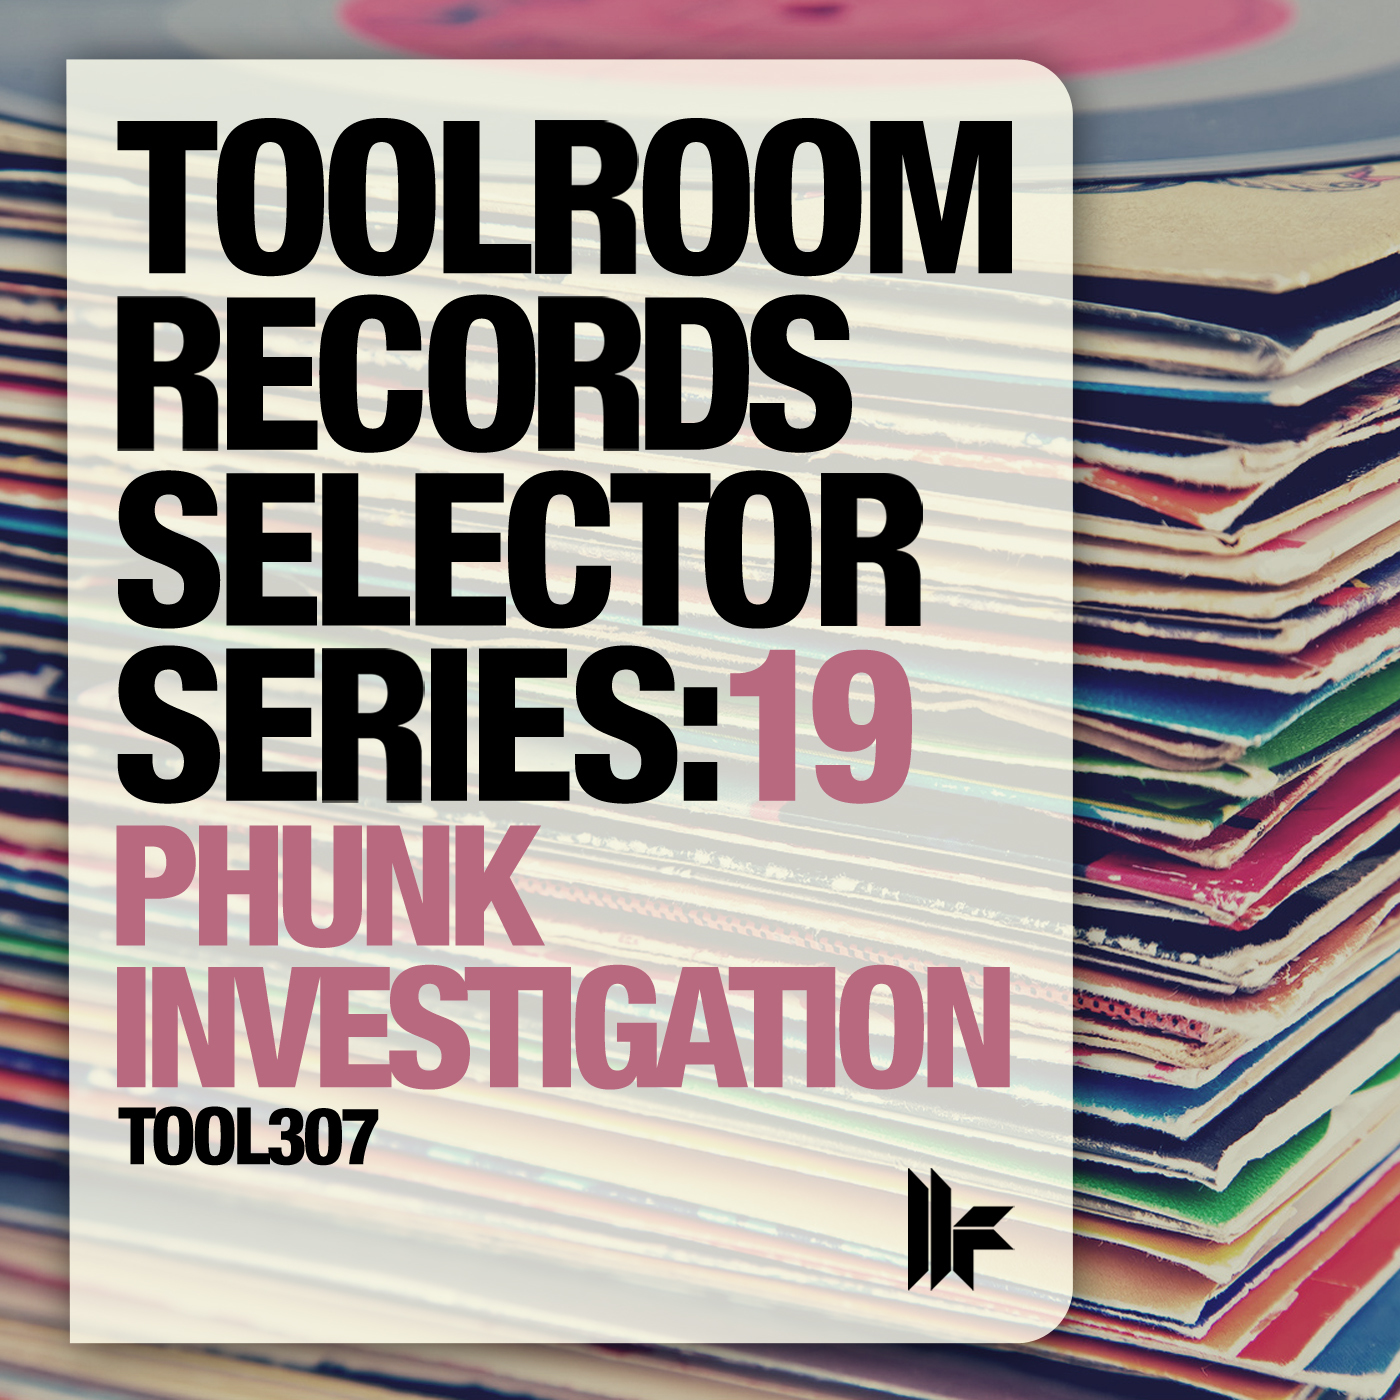 Toolroom Records Selector Series: 19 Phunk Investigation (Continuous DJ Mix)